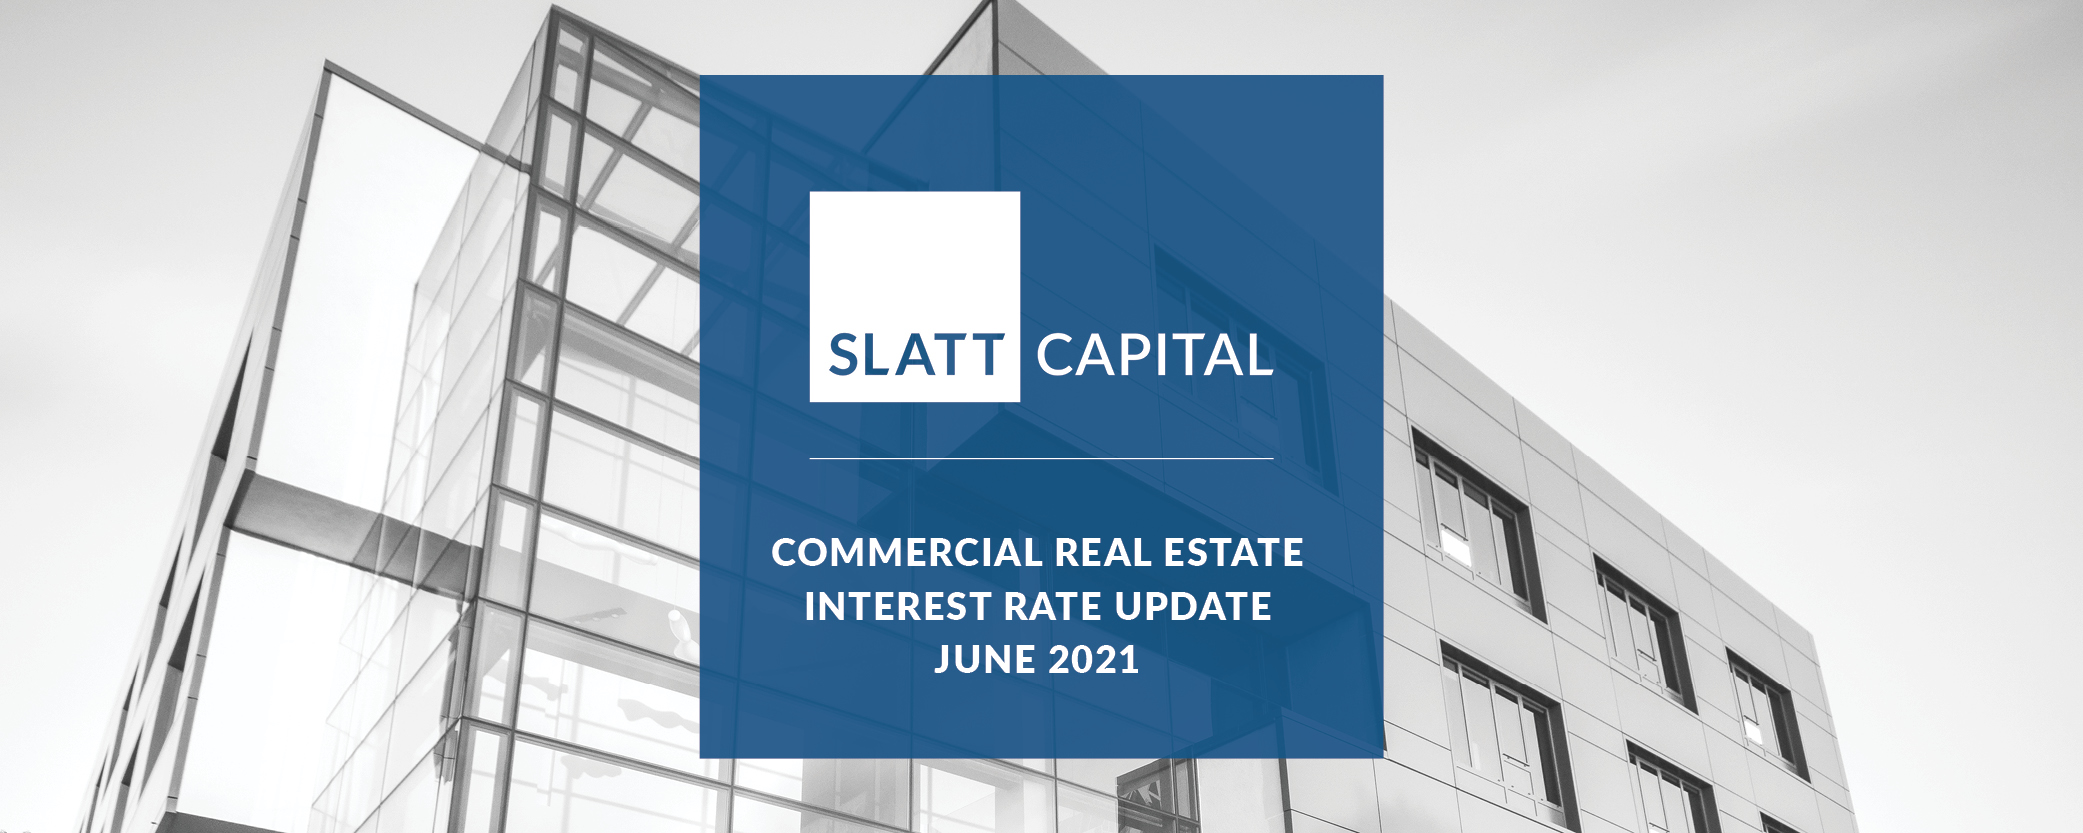 What is the effect of the current interest rate on the Commercial Real Estate industry?